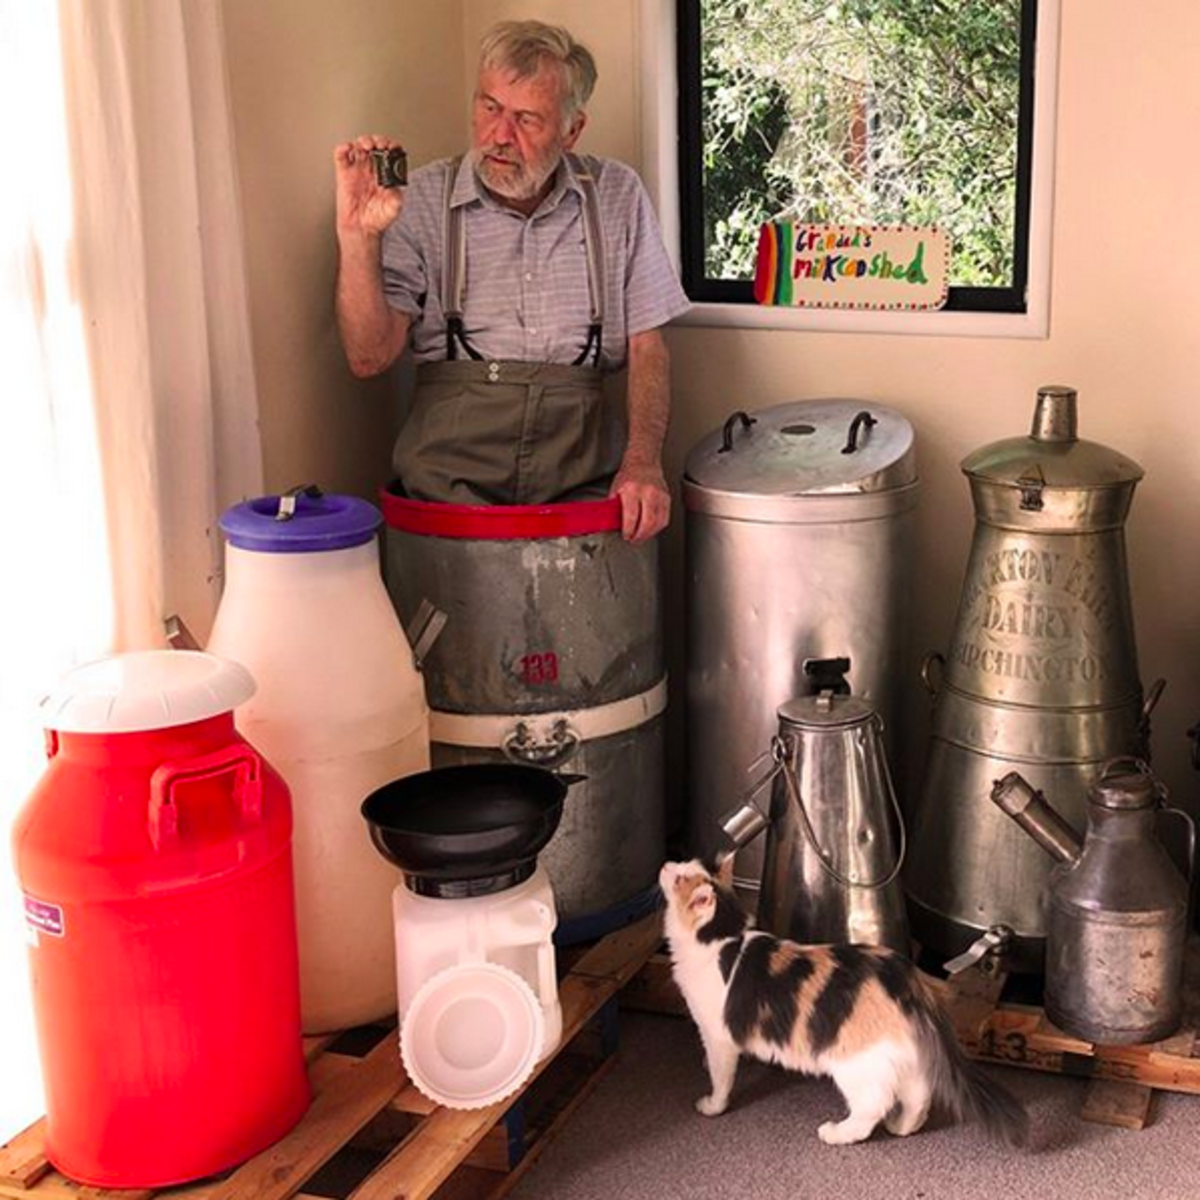 Ian Spellerberg is standing in his largest milk can (25 gallons) from New Zealand and is holding the smallest milk can in the world (1/8th of a pint) from England. His adopted cat Florence (found as a kitten on a country road) watches with interest. Also shown are three modern plastic milk cans on the left. On the right there are two unusual cans with spouts.